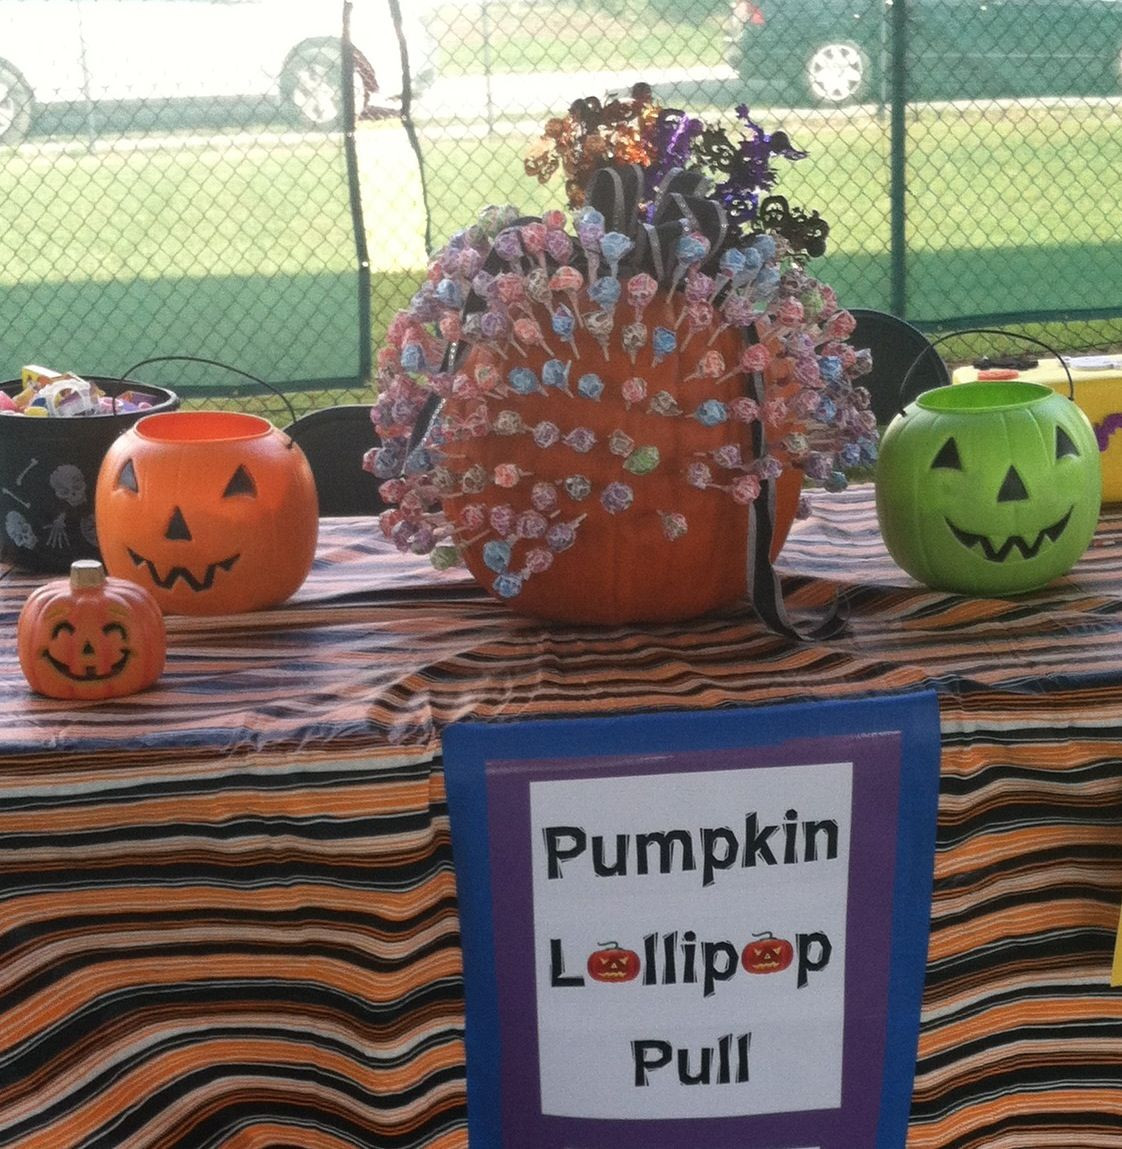 Fall Fest Booth Ideas
 Lollipop pull Game NCS Harvest Festival in 2019